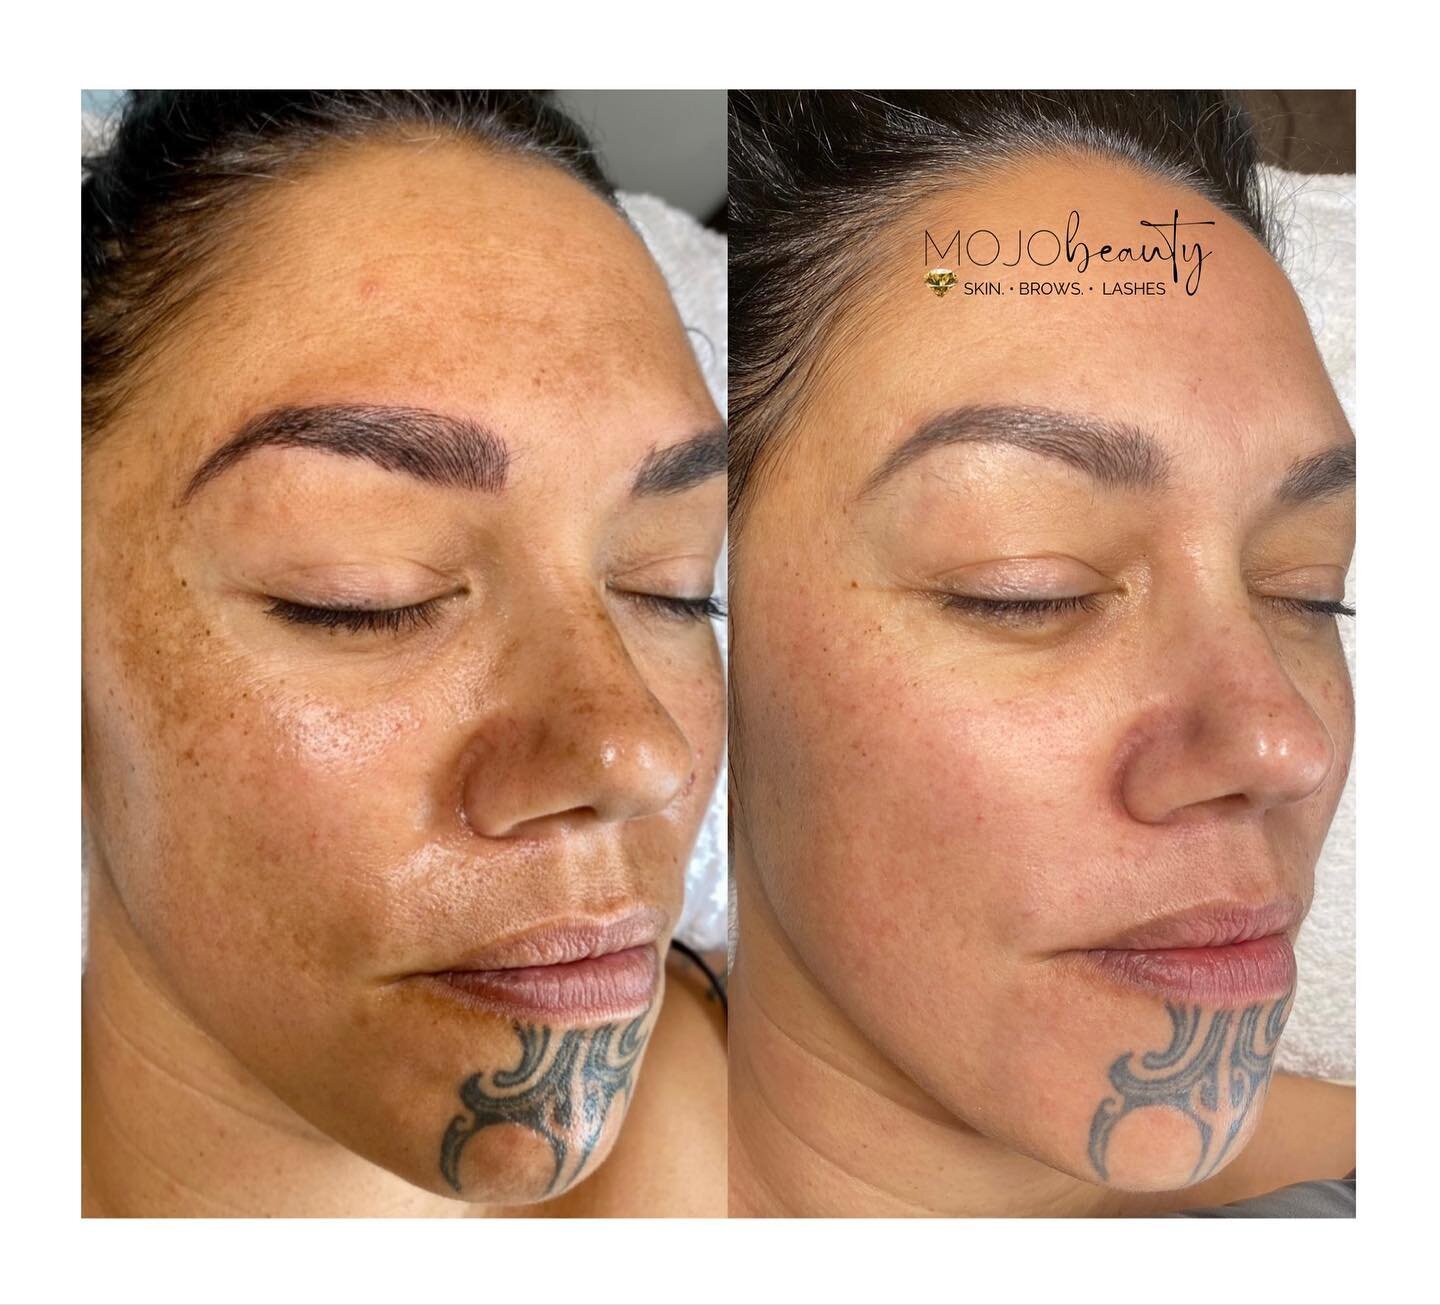 ✨Micro-dermal needling is a method that Nik at Mojo Beauty uses to treat different skin conditions. The technique involves using multiple tiny, sterile needles to puncture the skin causing physical trauma to the skin. This trauma prompts the derma, a